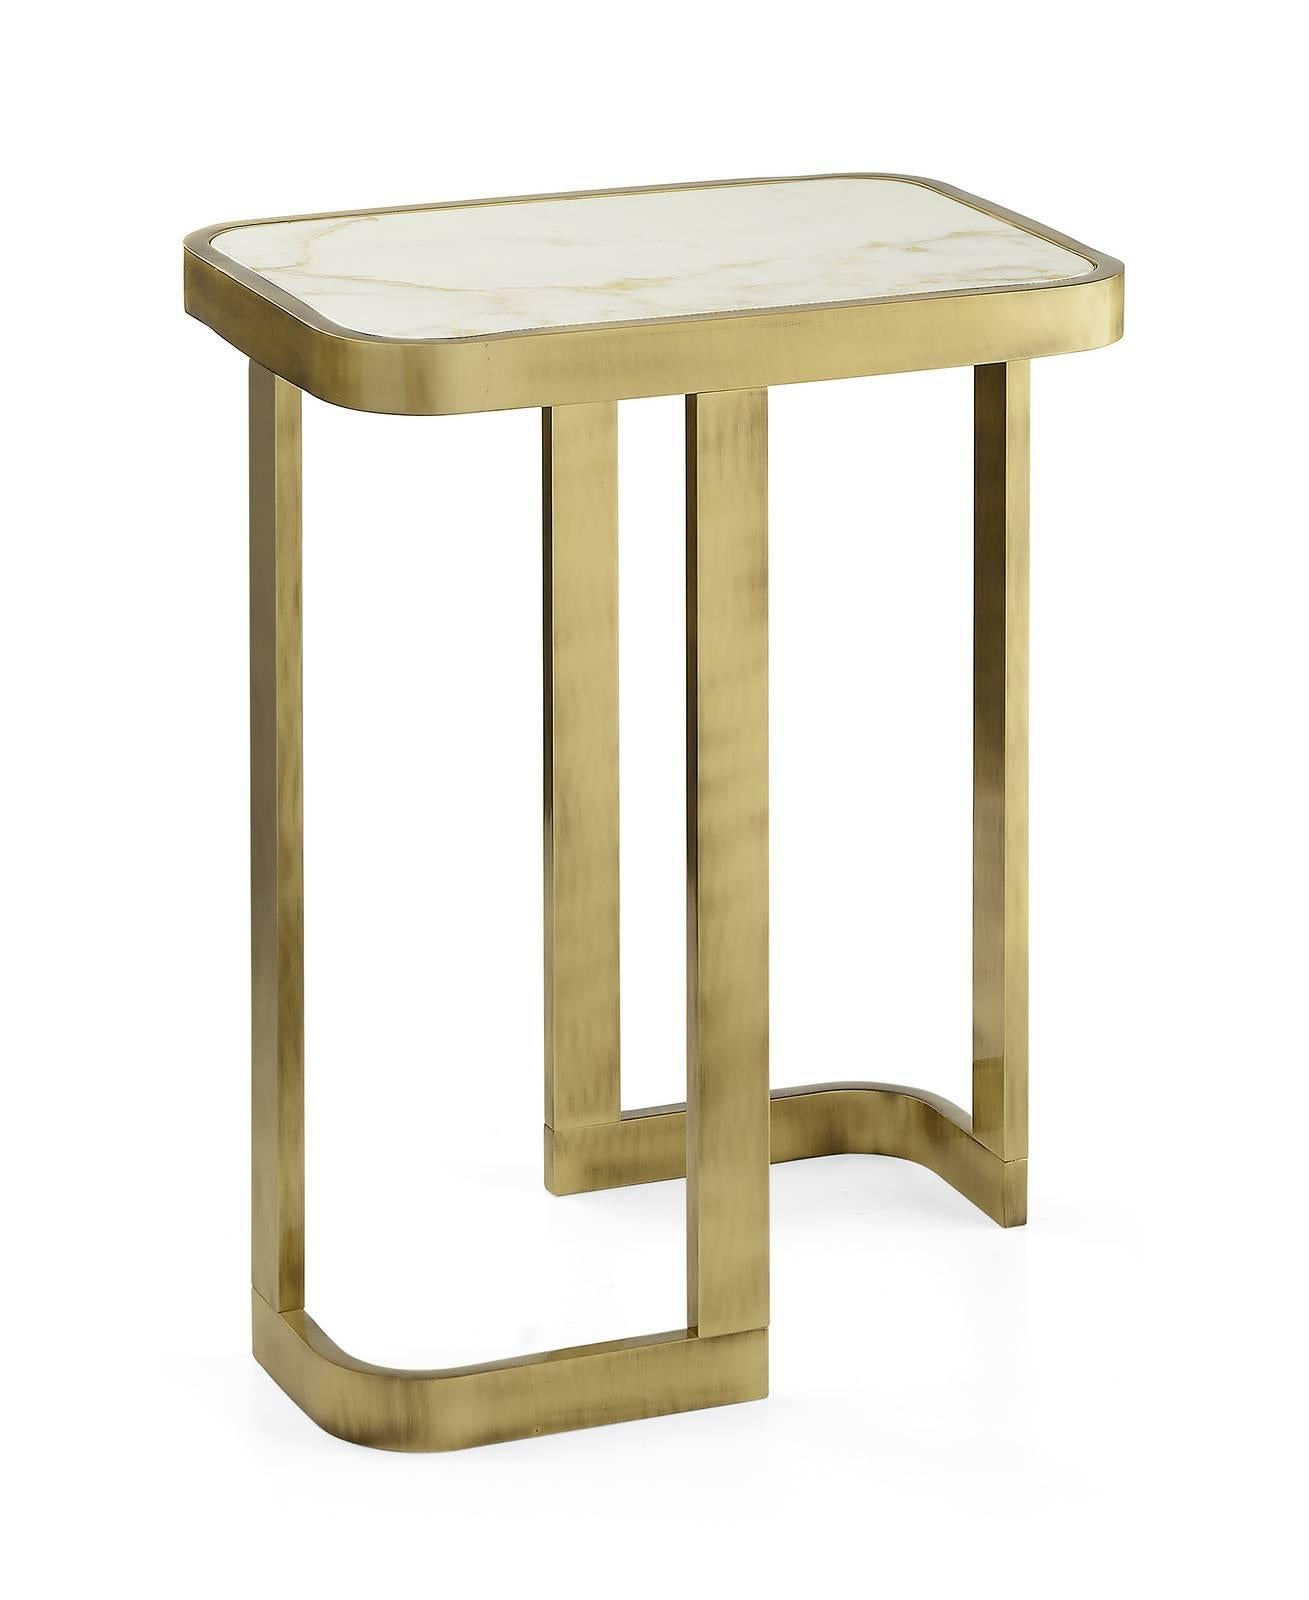 This elegant side table will be a stunning addition to a living room or even a bedroom. Its modern Silhouette, with its curved lines and Minimalist structure, complements the noble material used for the top, creating a timeless object of functional